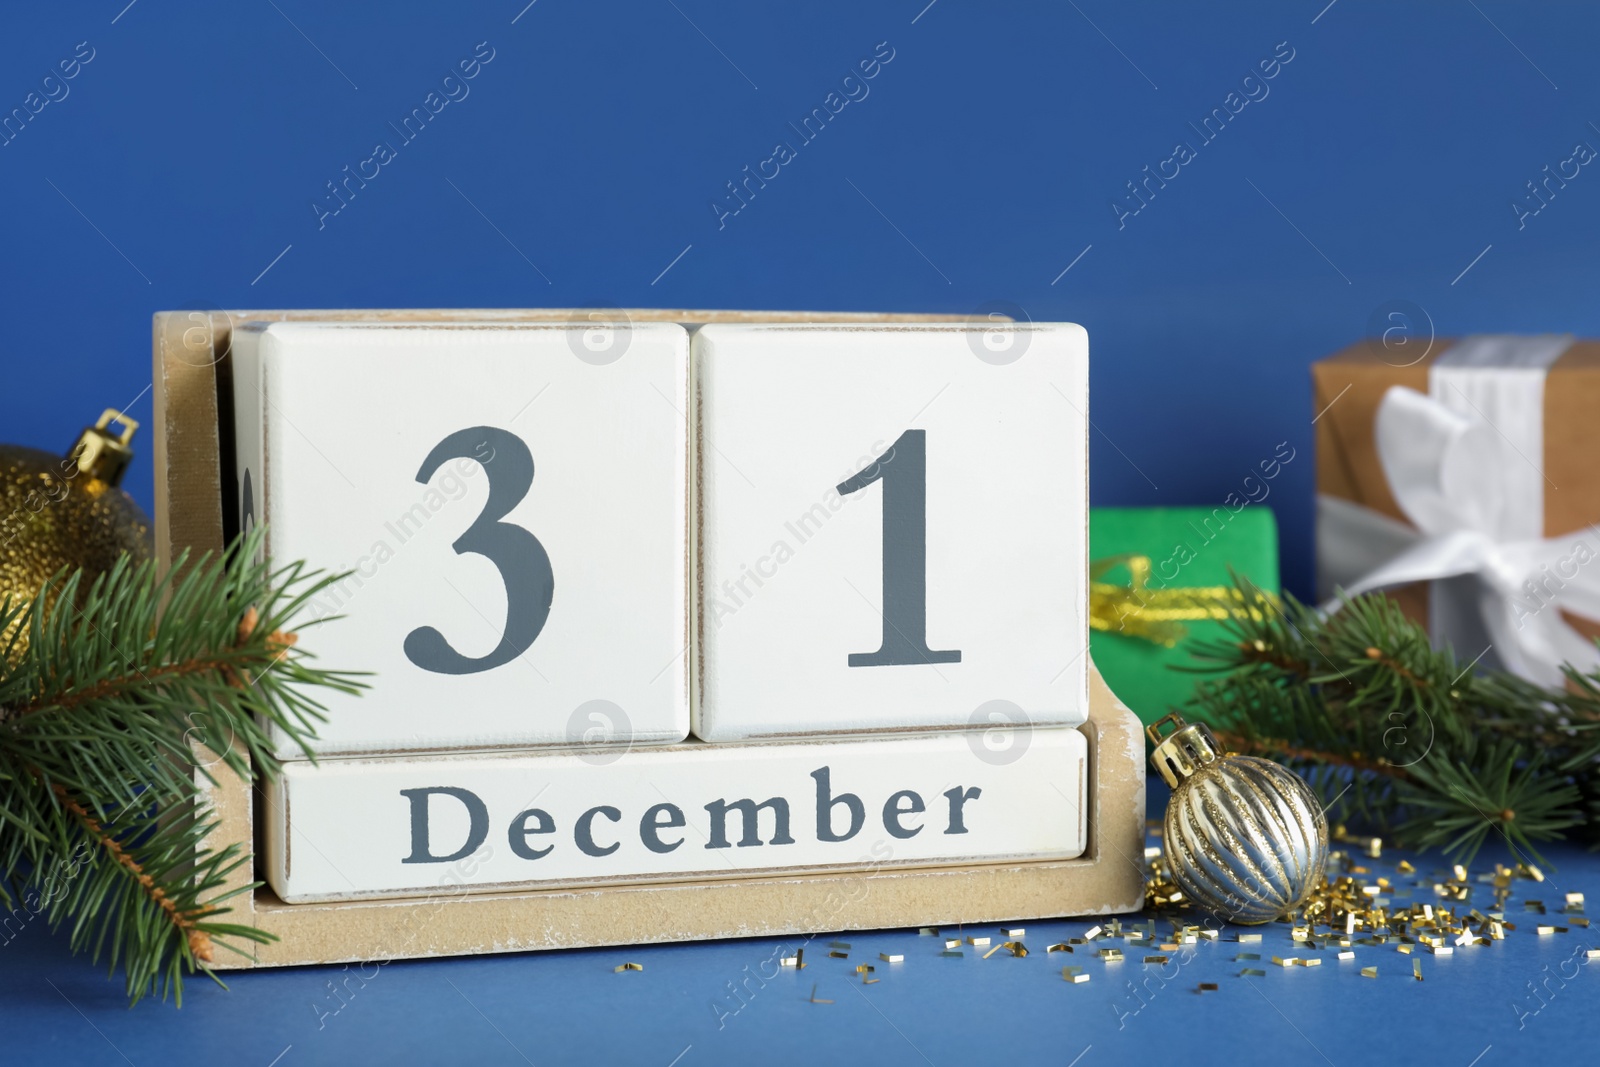 Photo of Block calendar and Christmas decor on blue background. New Year countdown